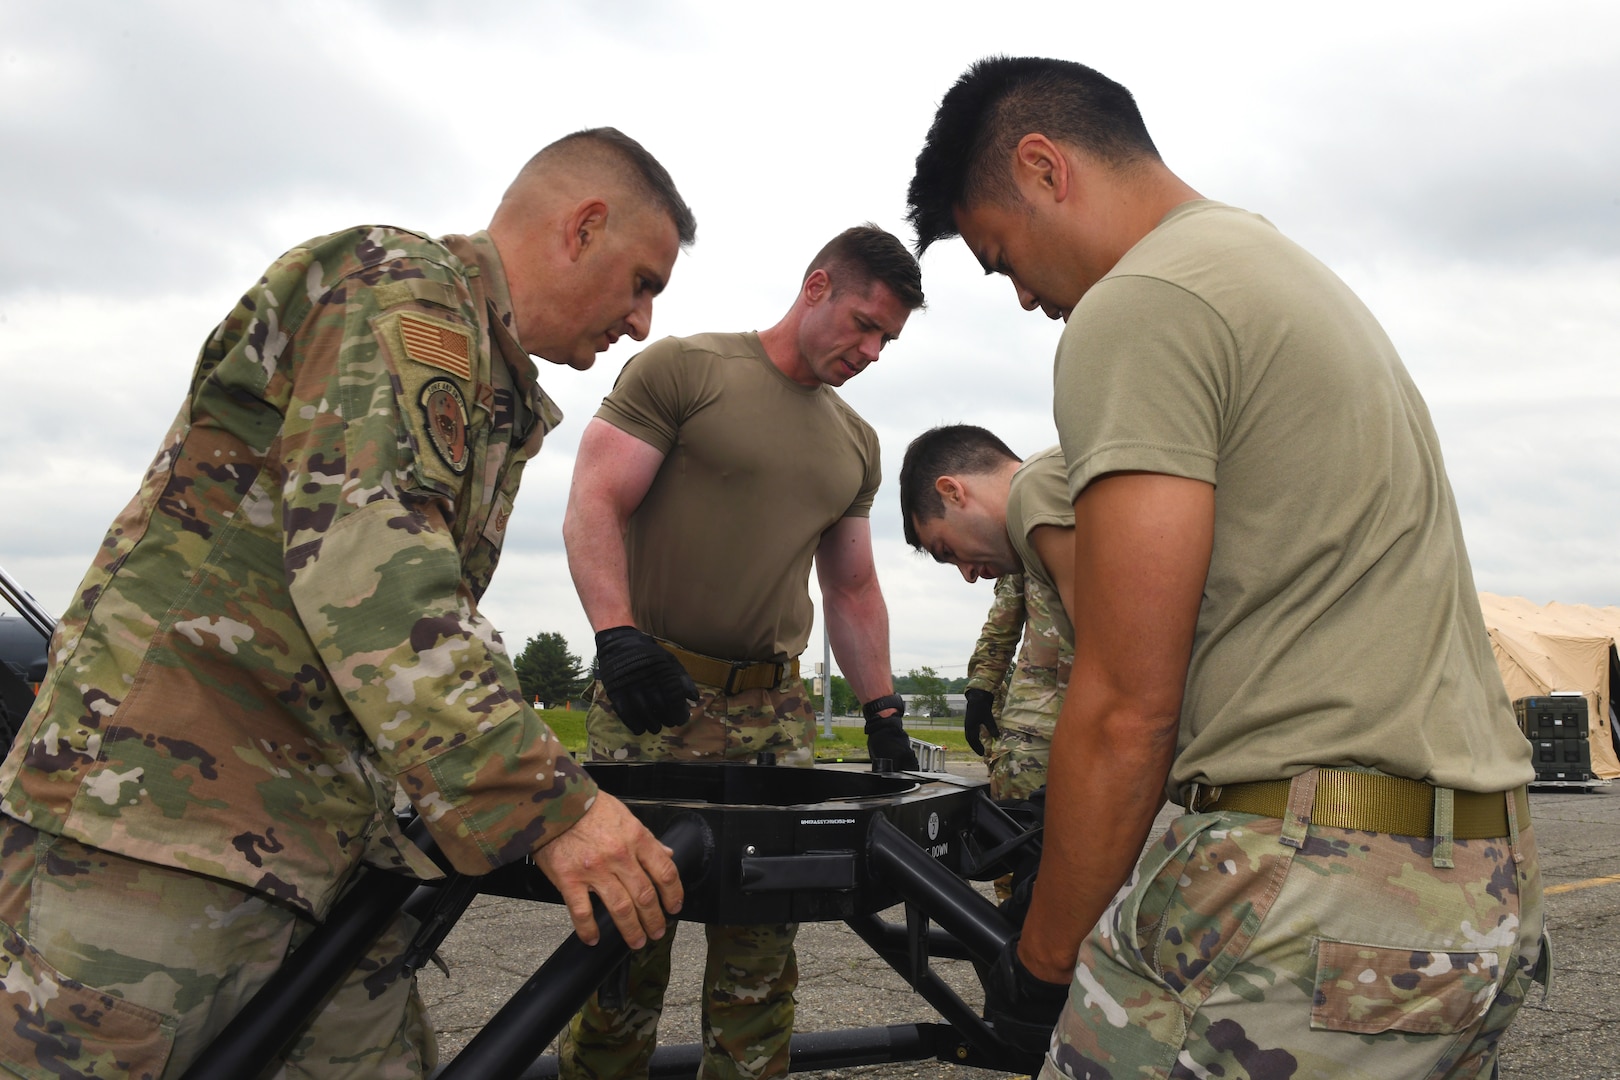 From left to right, Tech. Sgt. Salvatore Izzo, Tech. Sgt. Christopher Hodge, Staff Sgt. Christopher Jones and 1st Lt. Zachary Burns with the Florida Air National Guard’s 114th Electromagnetic Warfare Squadron stabilize what will be the base of an antenna as part of exercise ThunderMoose, June 13, 2023, at Bangor Air National Guard Base in Maine. The exercise involved transporting a electromagnetic warfare system to the base followed by setting up an operating facility.